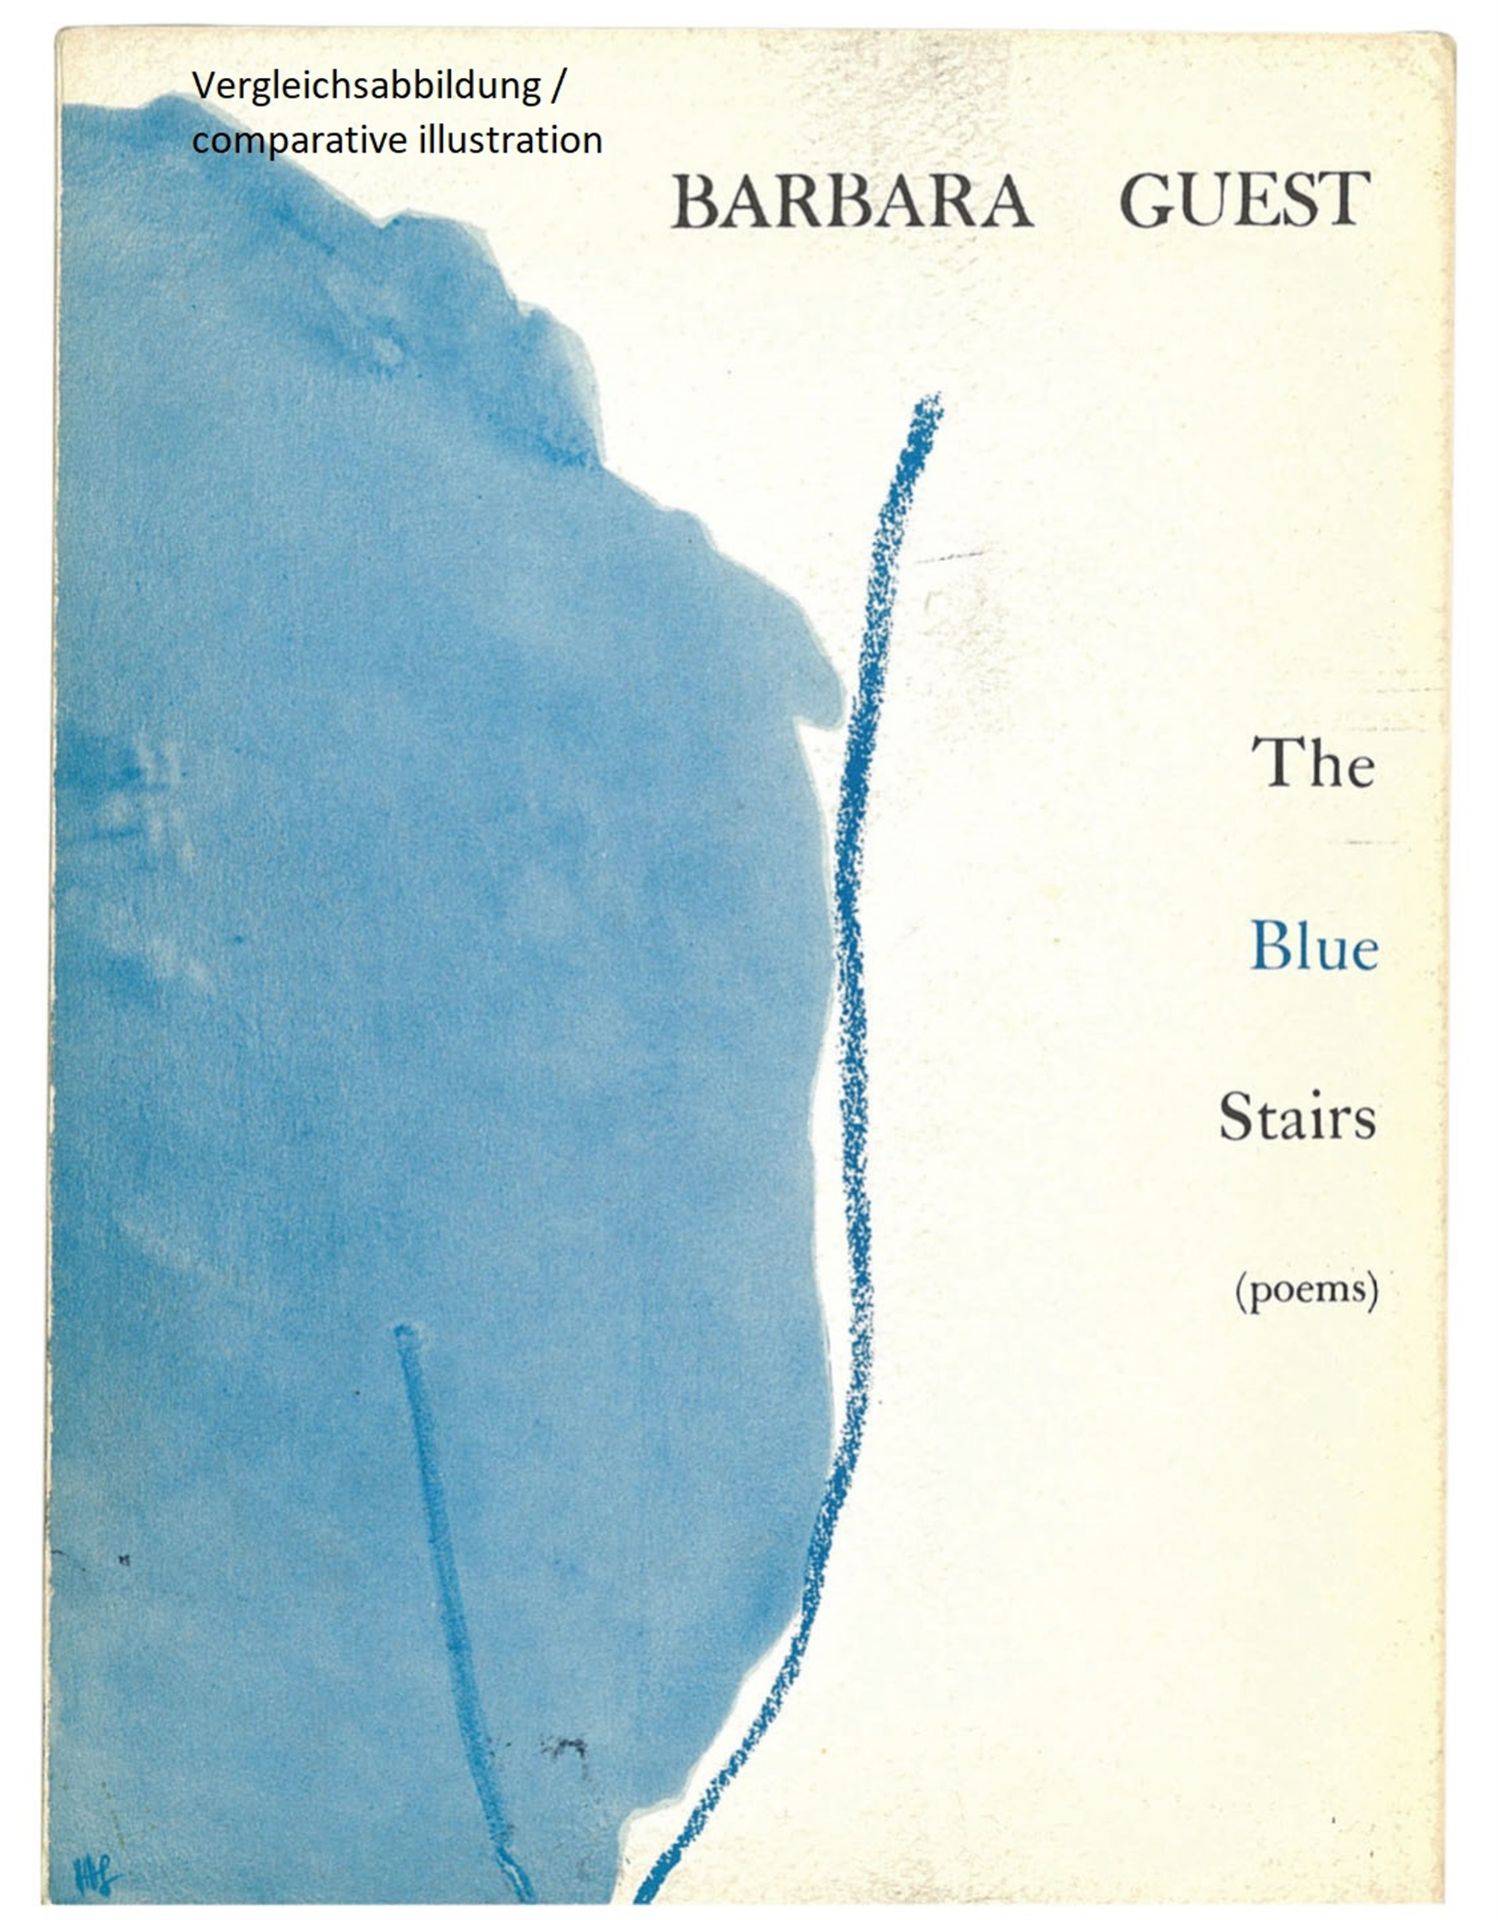 Helen Frankenthaler, Untitled (Original cover for "The Blue Stairs", a book of poetry by Barbara Gue - Image 2 of 2